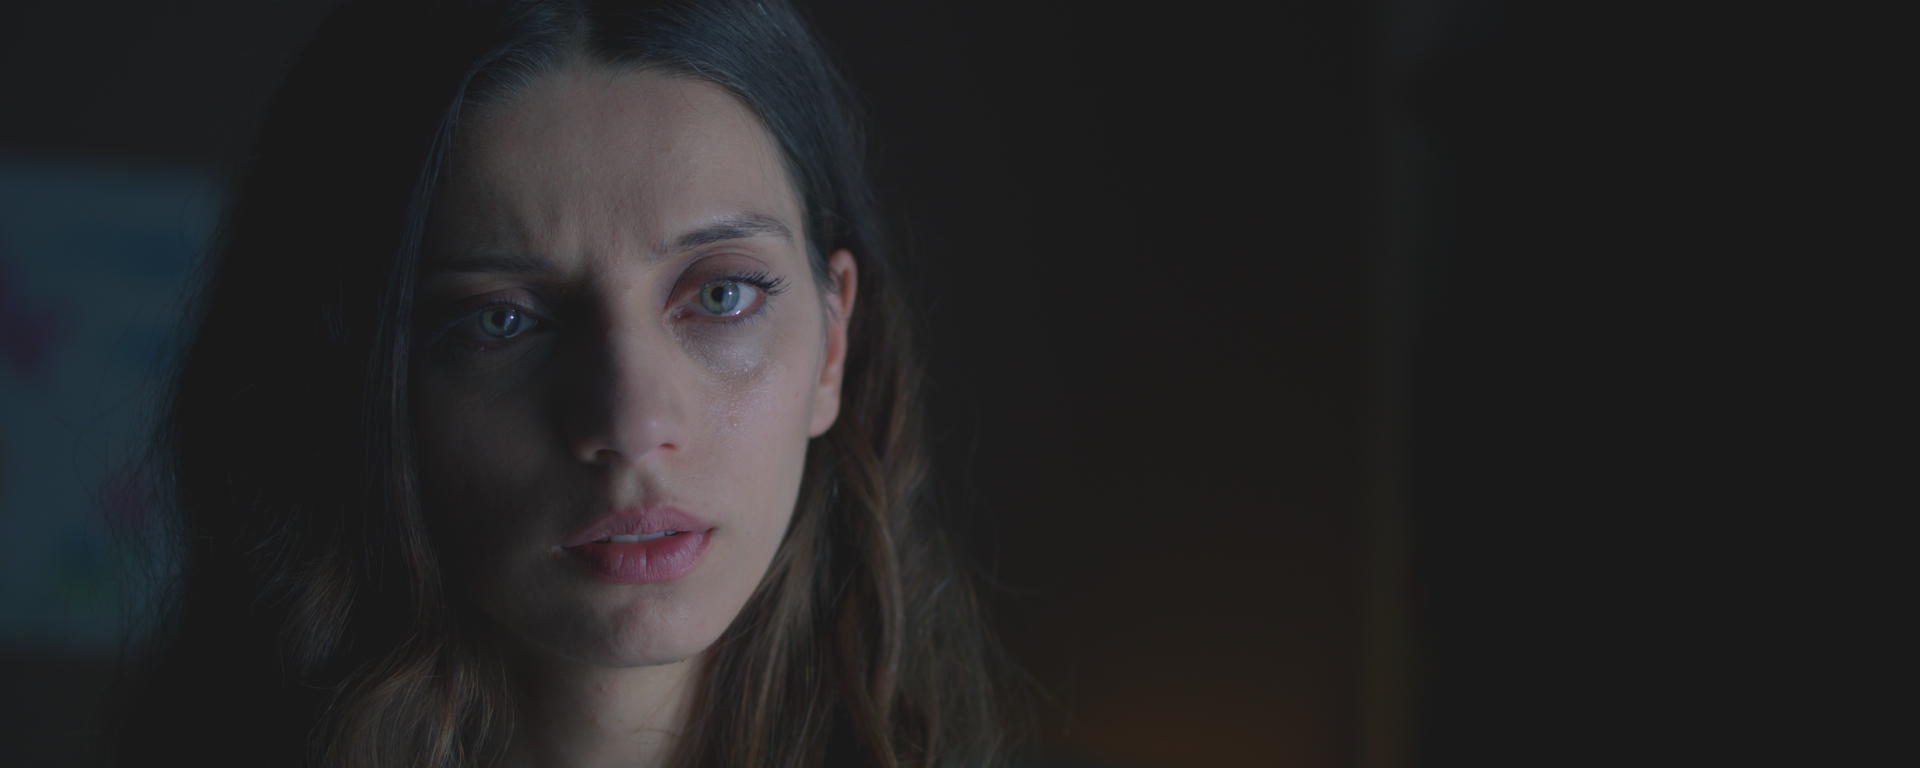 Angela Sarafyan starring in James Bird's indie film "We Are Boats"